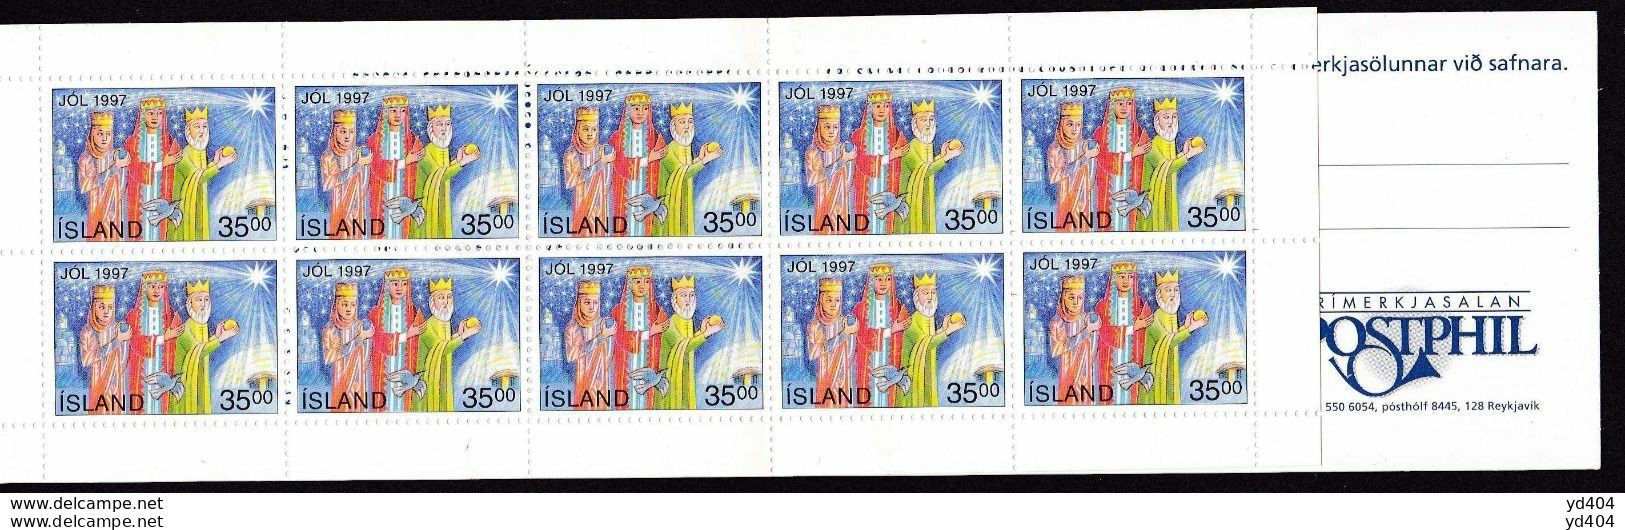 IS669 – ISLANDE - ICELAND - BOOKLETS - 1997 - CHRISTMAS - Y&T # C833 MNH 16 € - Carnets